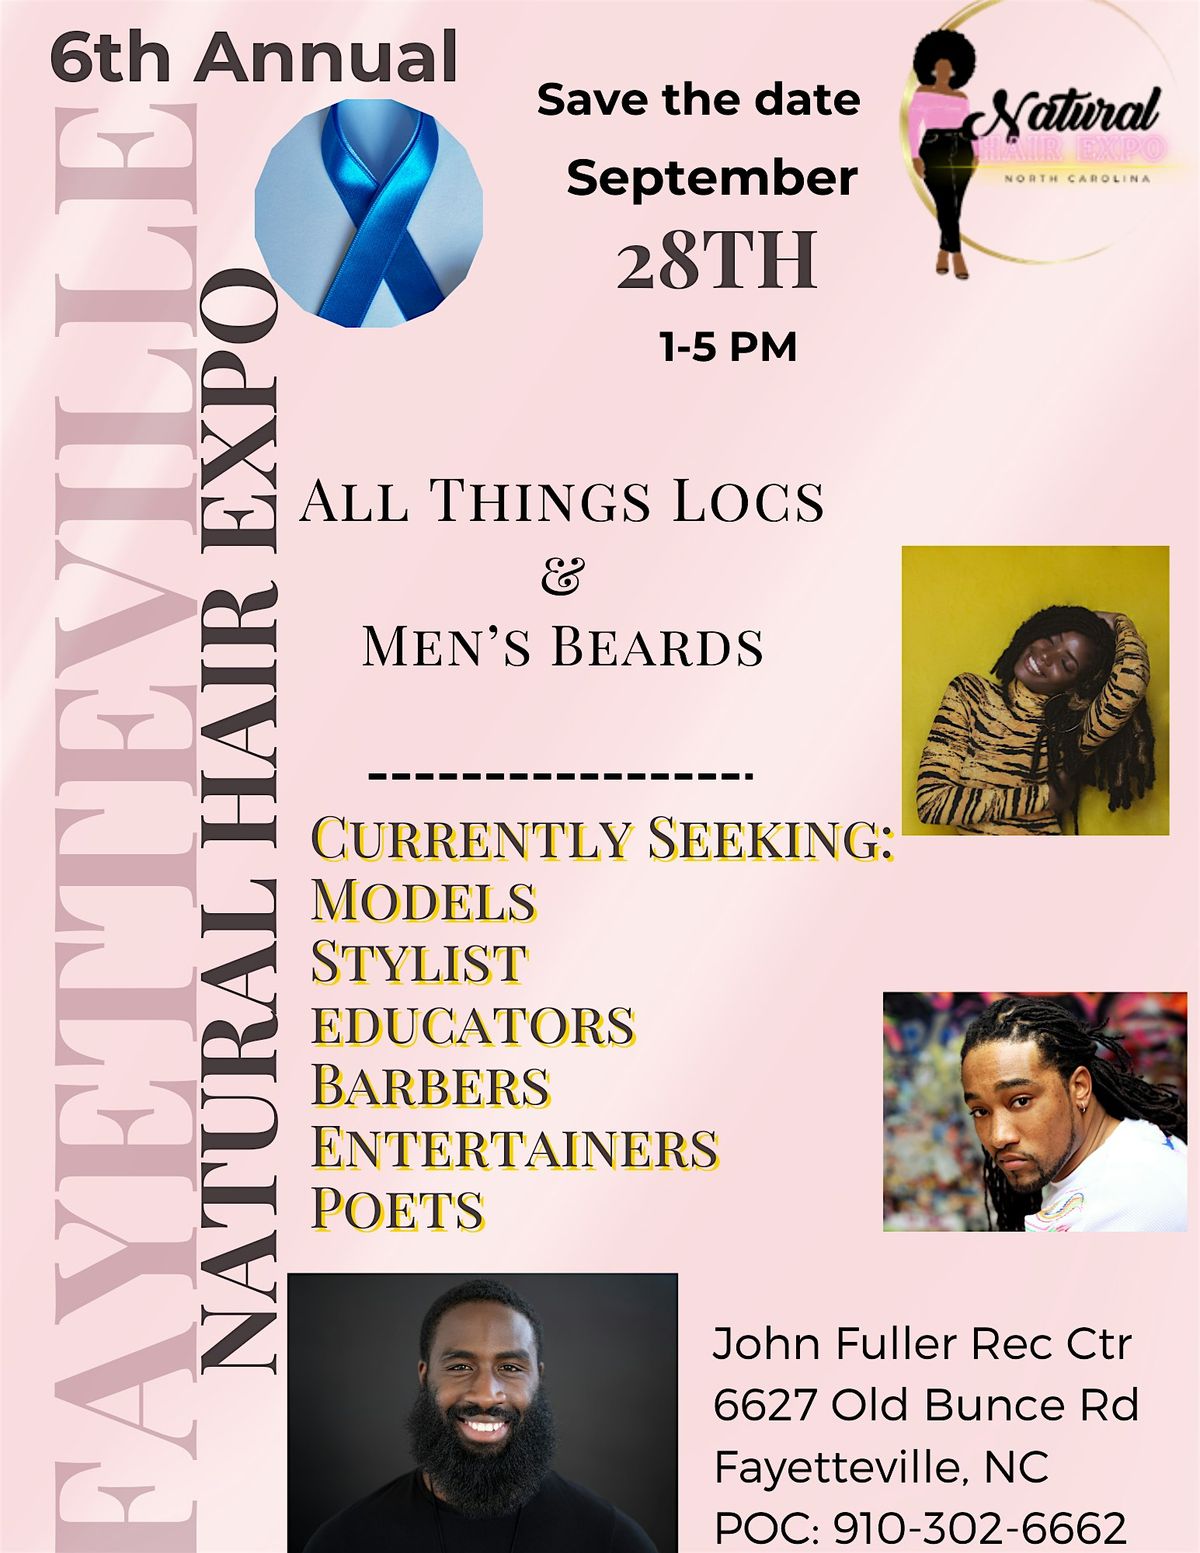 6th Annual Fayetteville Natural Hair Expo